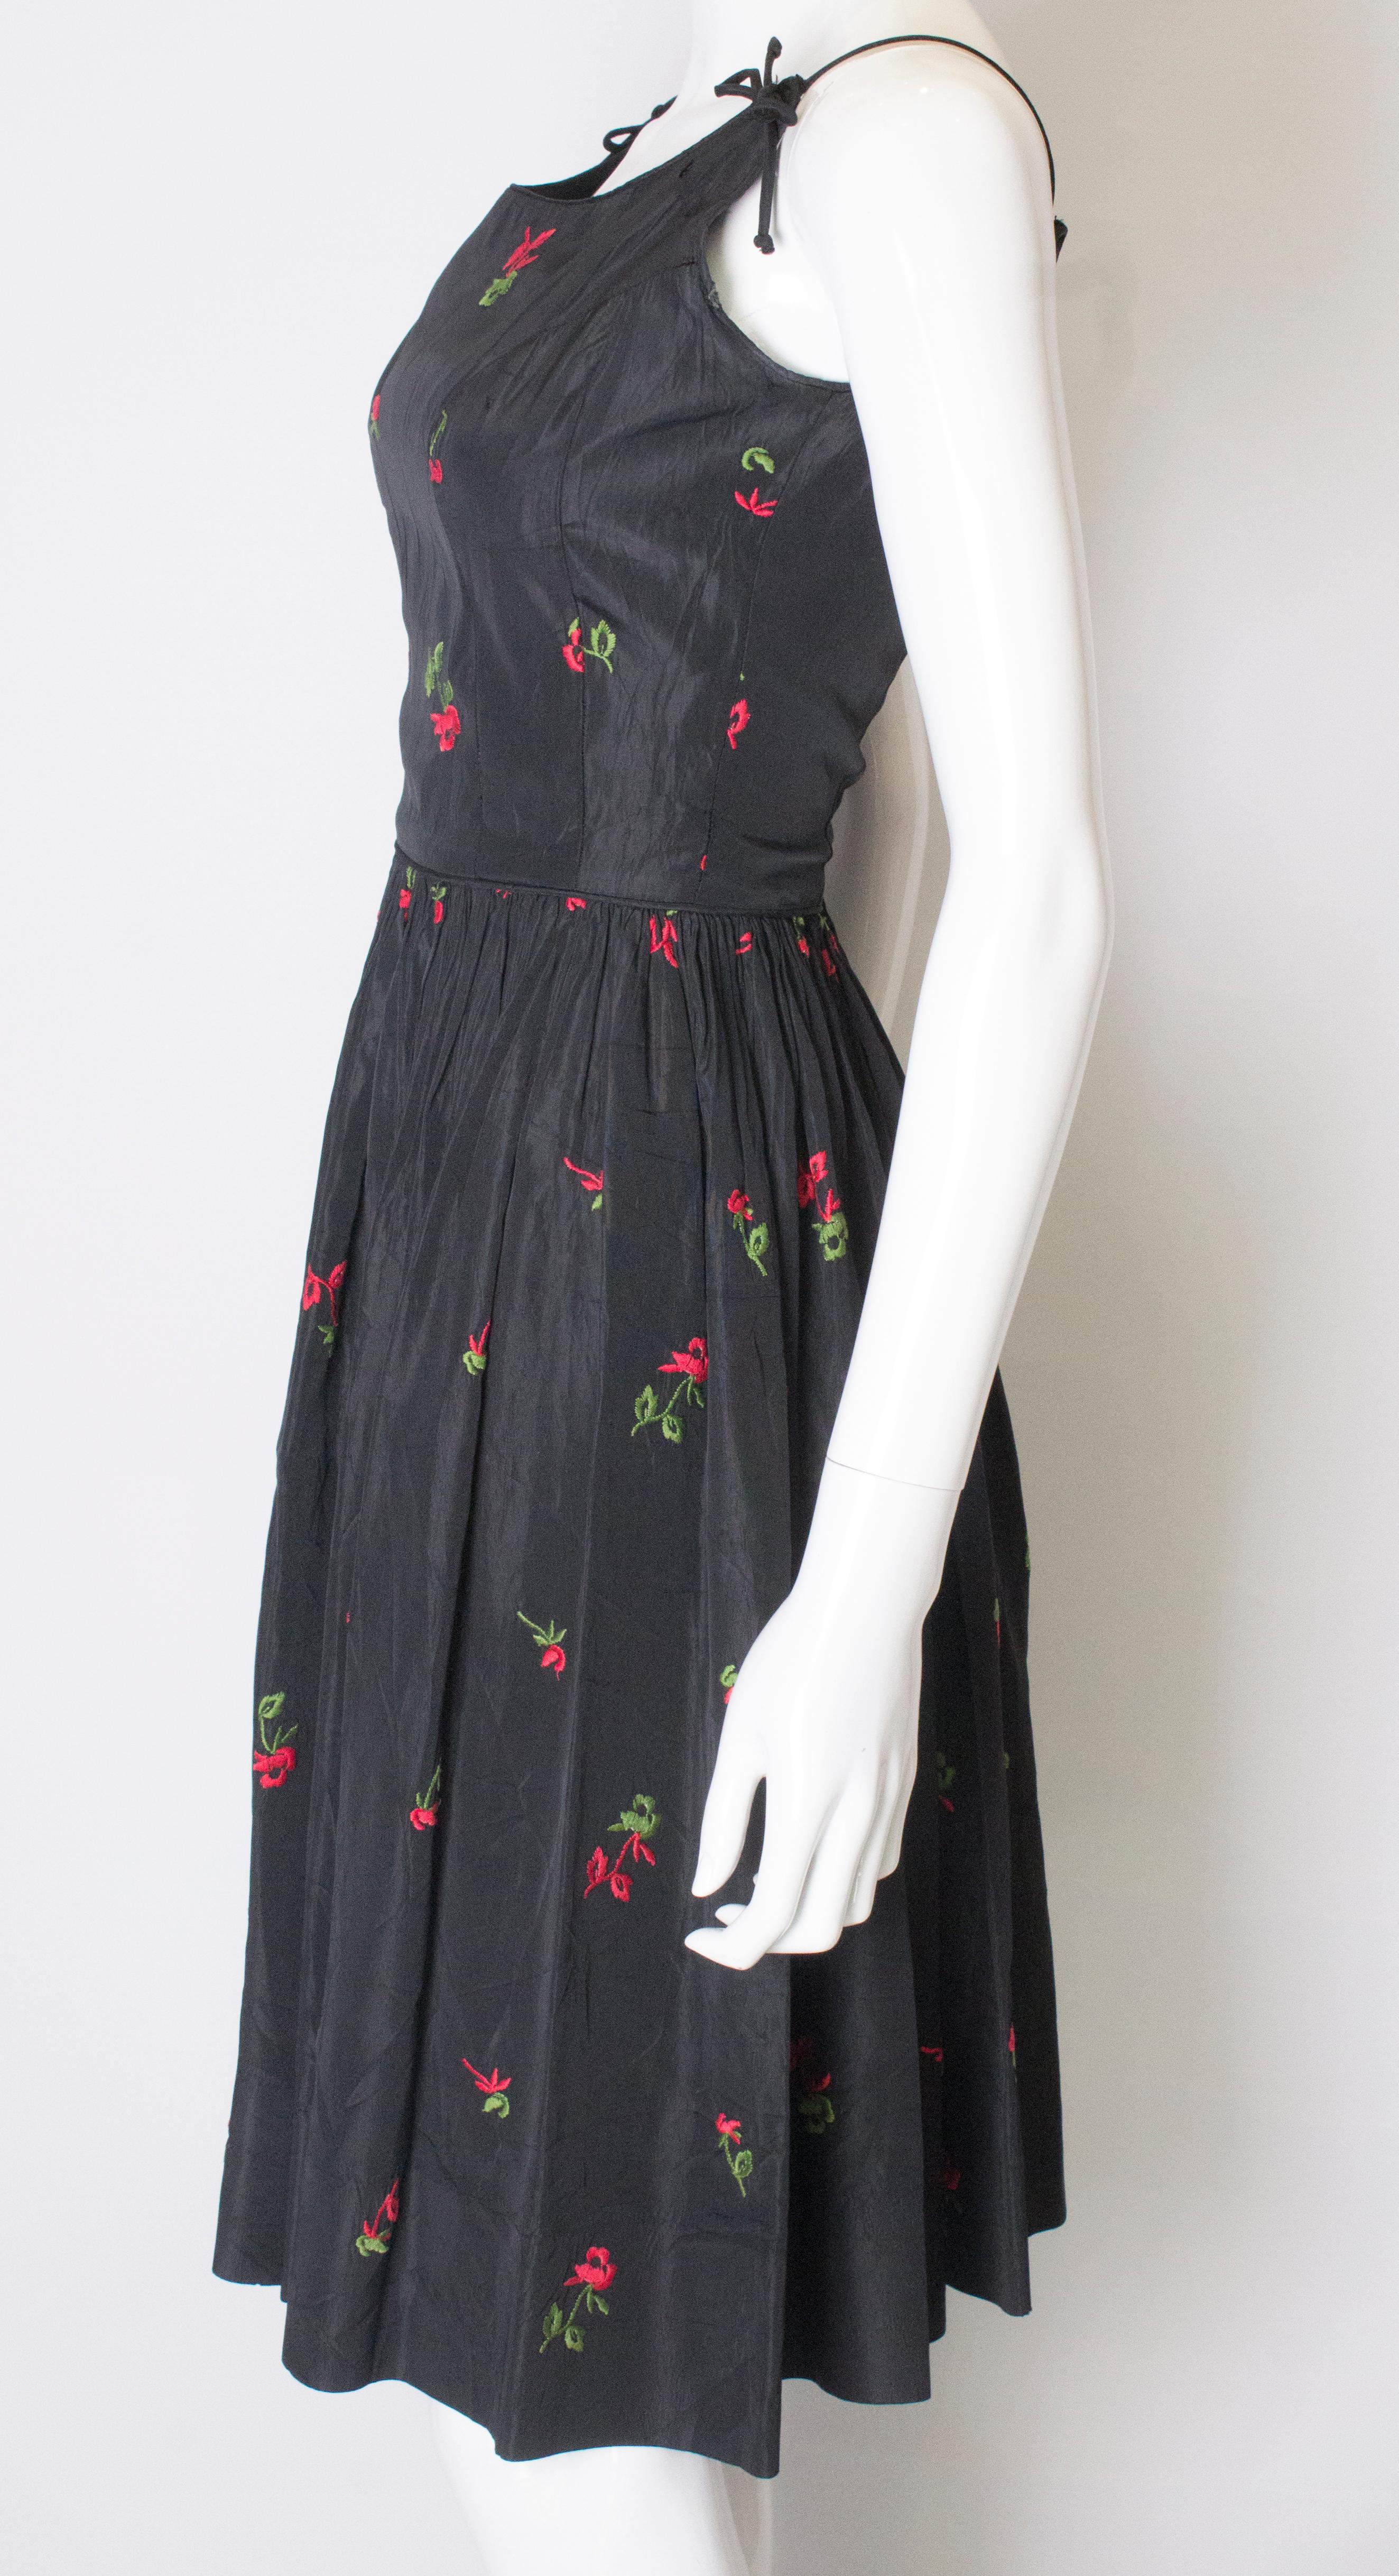 Women's A vintage 1950s black cinch swing dress with embroidered flowers 